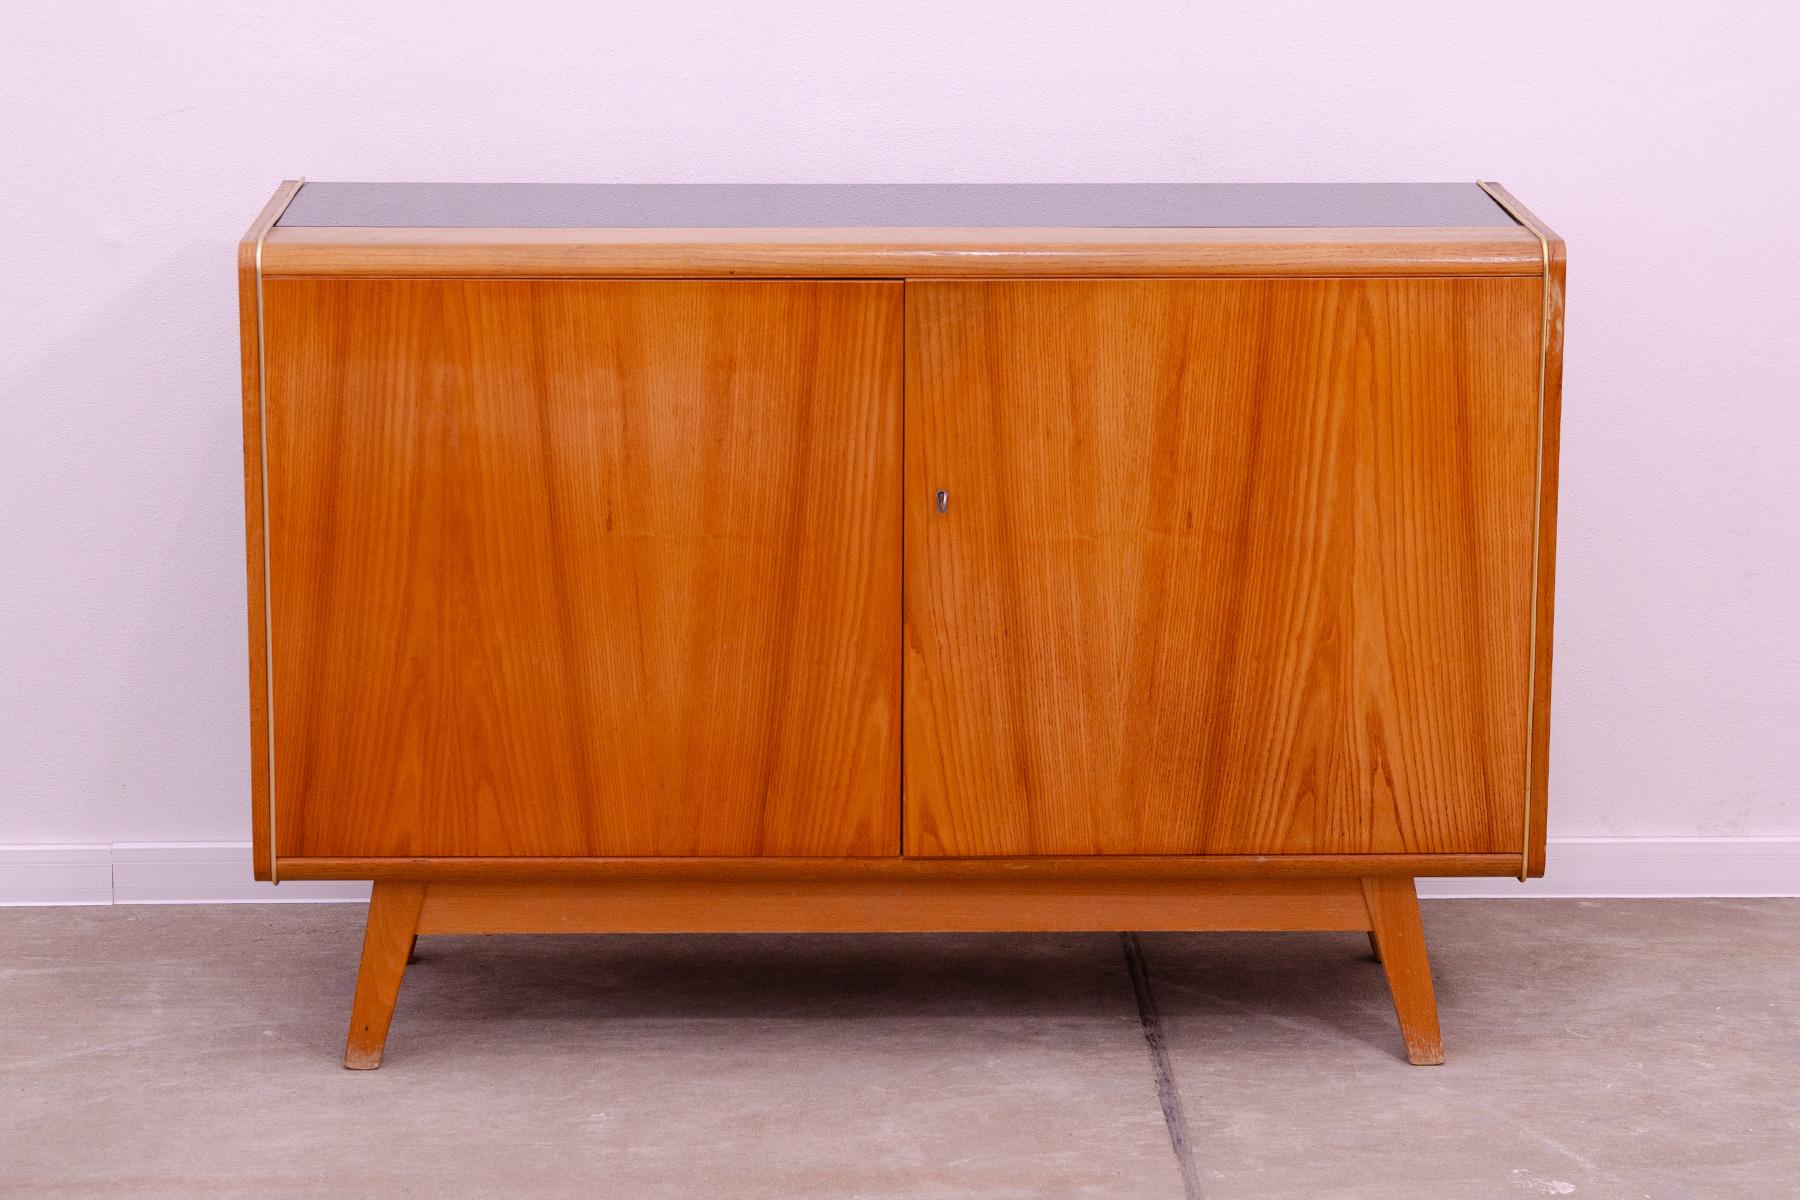 This mid century sideboard was designed by Hubert Nepožitek & Bohumil Landsman for Jitona company in the 1960´s. Material: beech wood, opaxite glass. In good Vintage condition, showing signs if age and using.

Height: 78 cm

lenght: 118 cm

width: